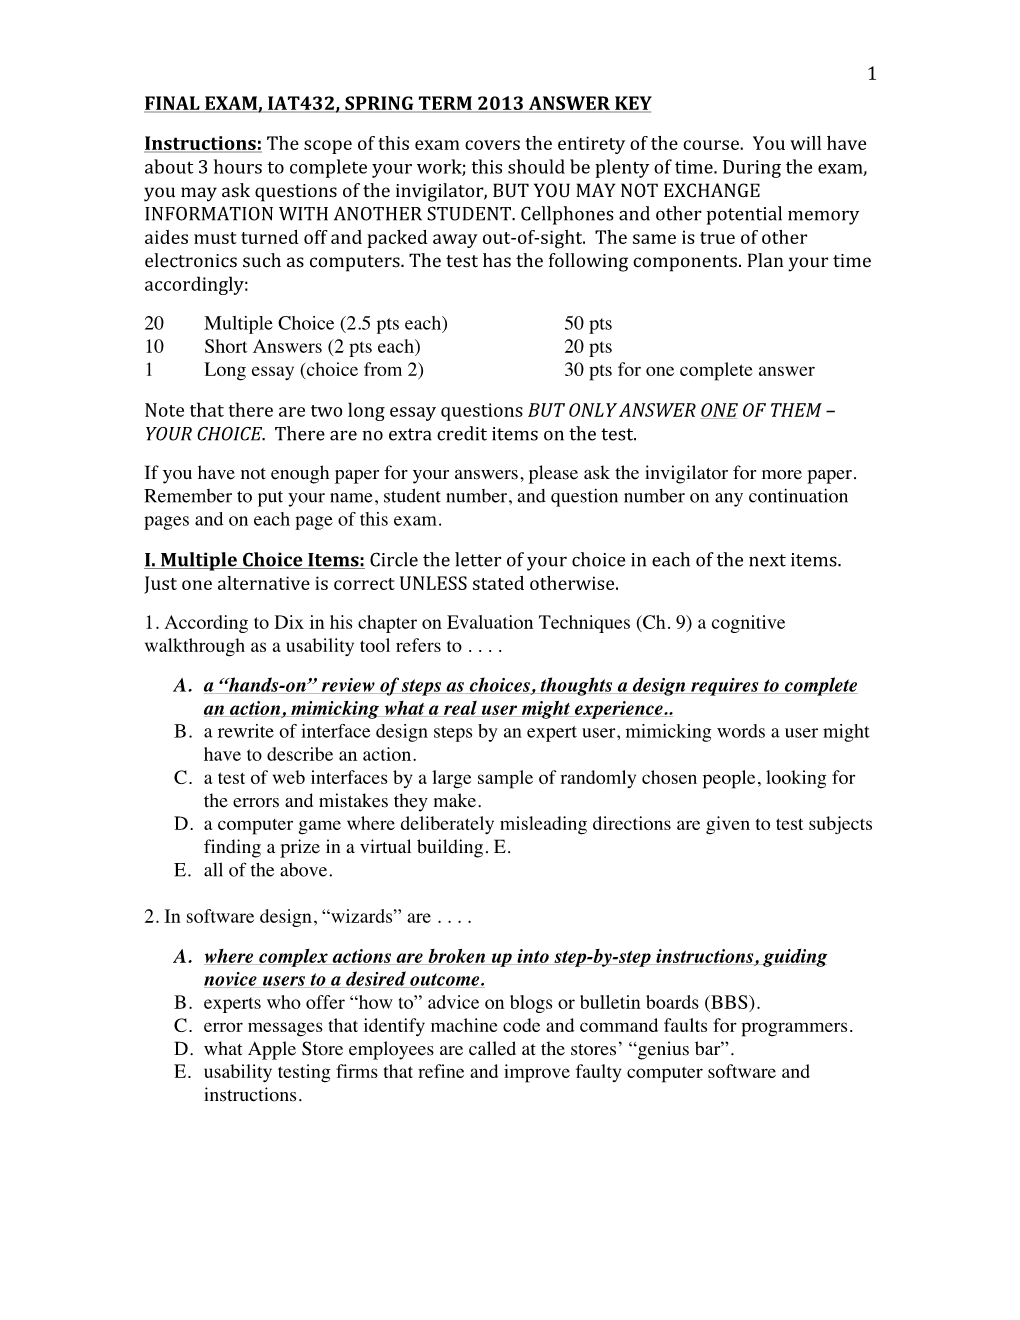 FINAL EXAM, IAT432, SPRING TERM 2013 ANSWER KEY Instructions: the Scope of This Exam Covers the Entirety of the Course